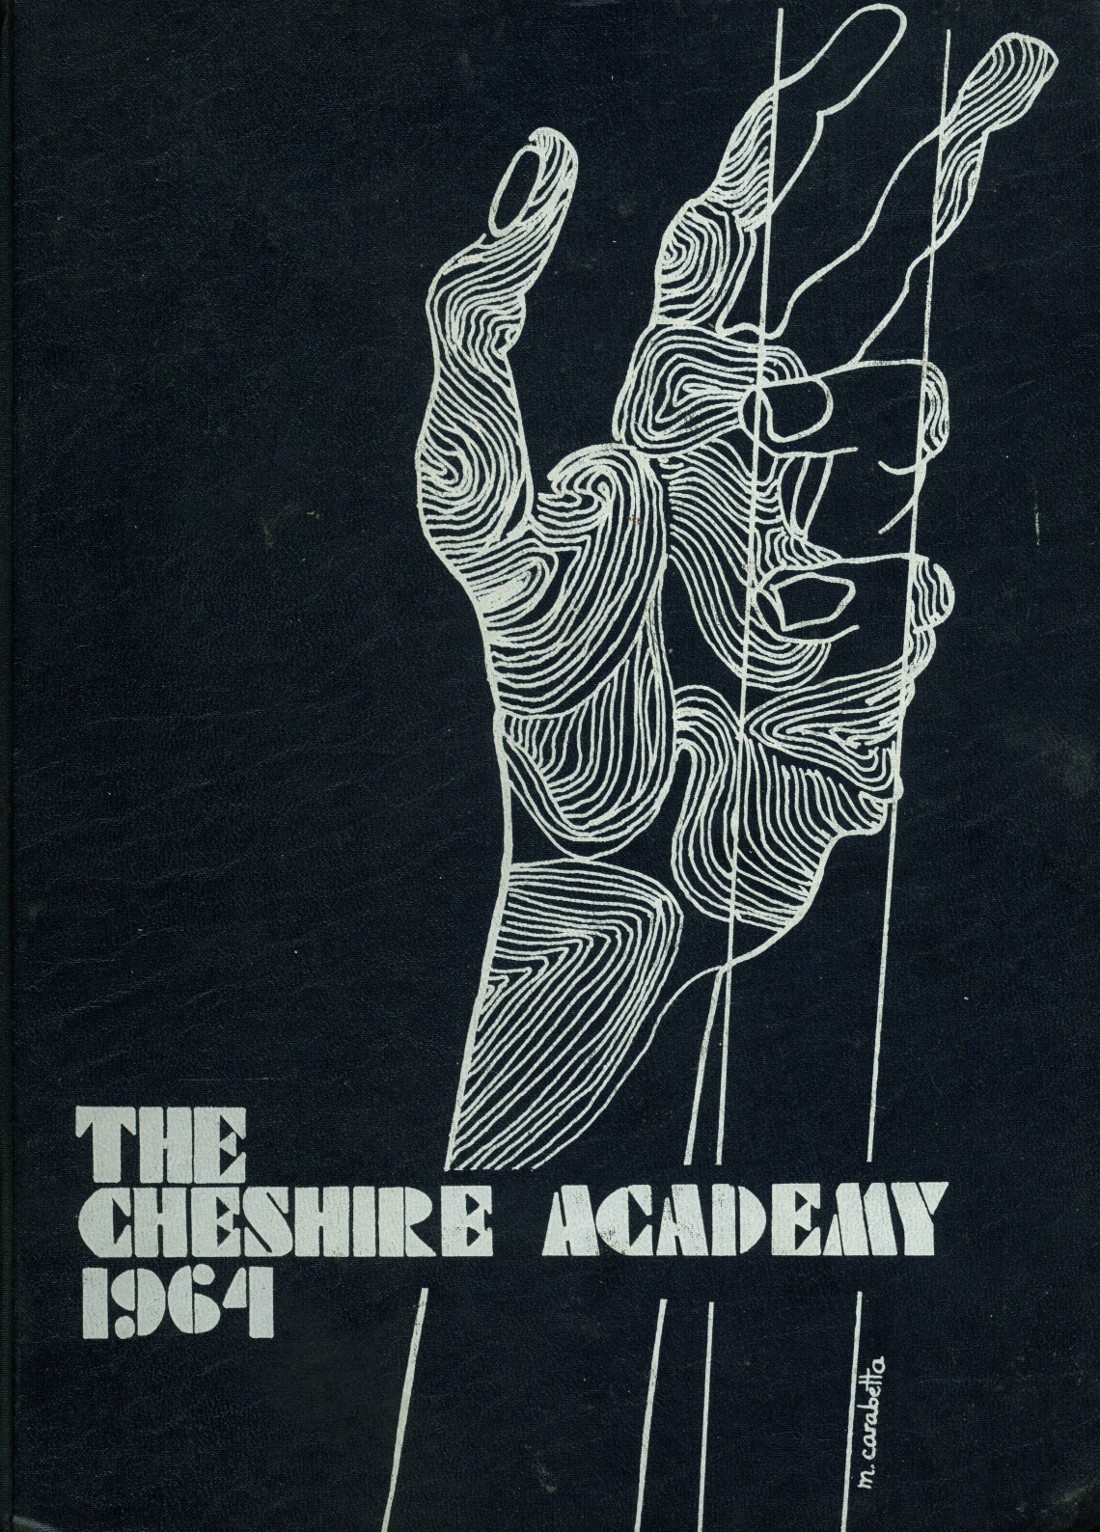 1964 yearbook from Cheshire Academy from Cheshire, Connecticut for sale